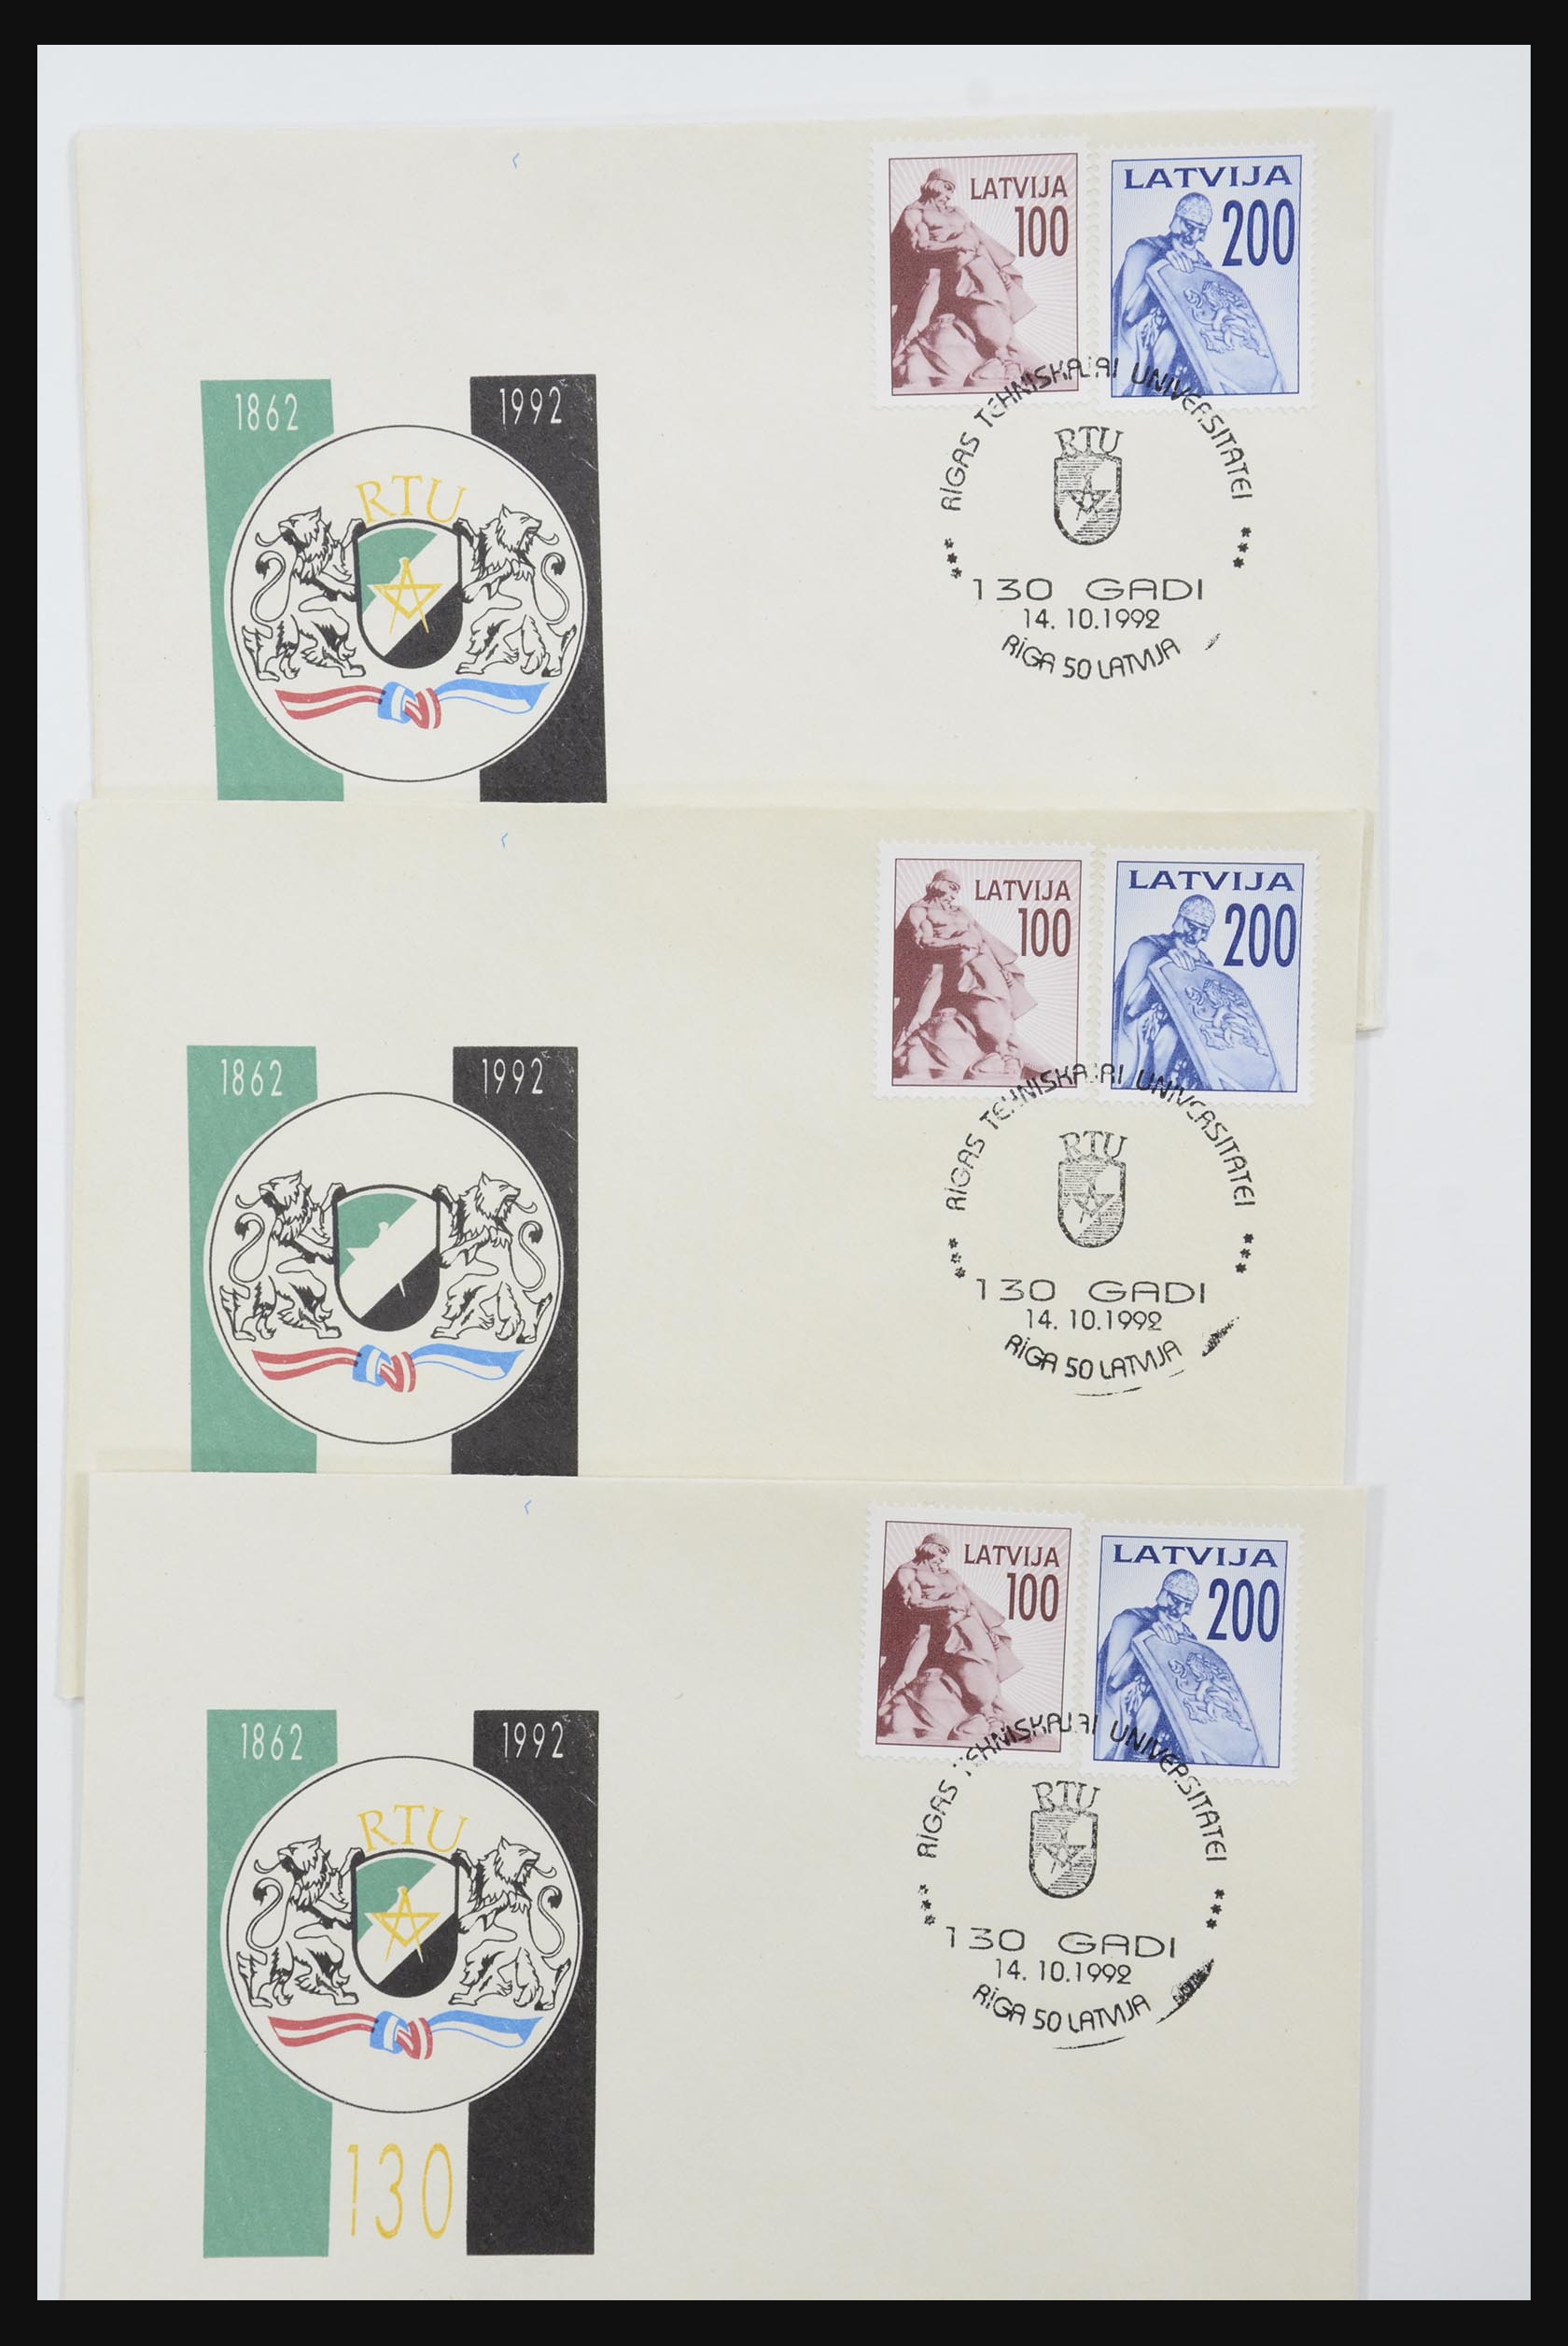 31584 642 - 31584 Latvia covers/FDC's and postal stationeries 1990-1992.